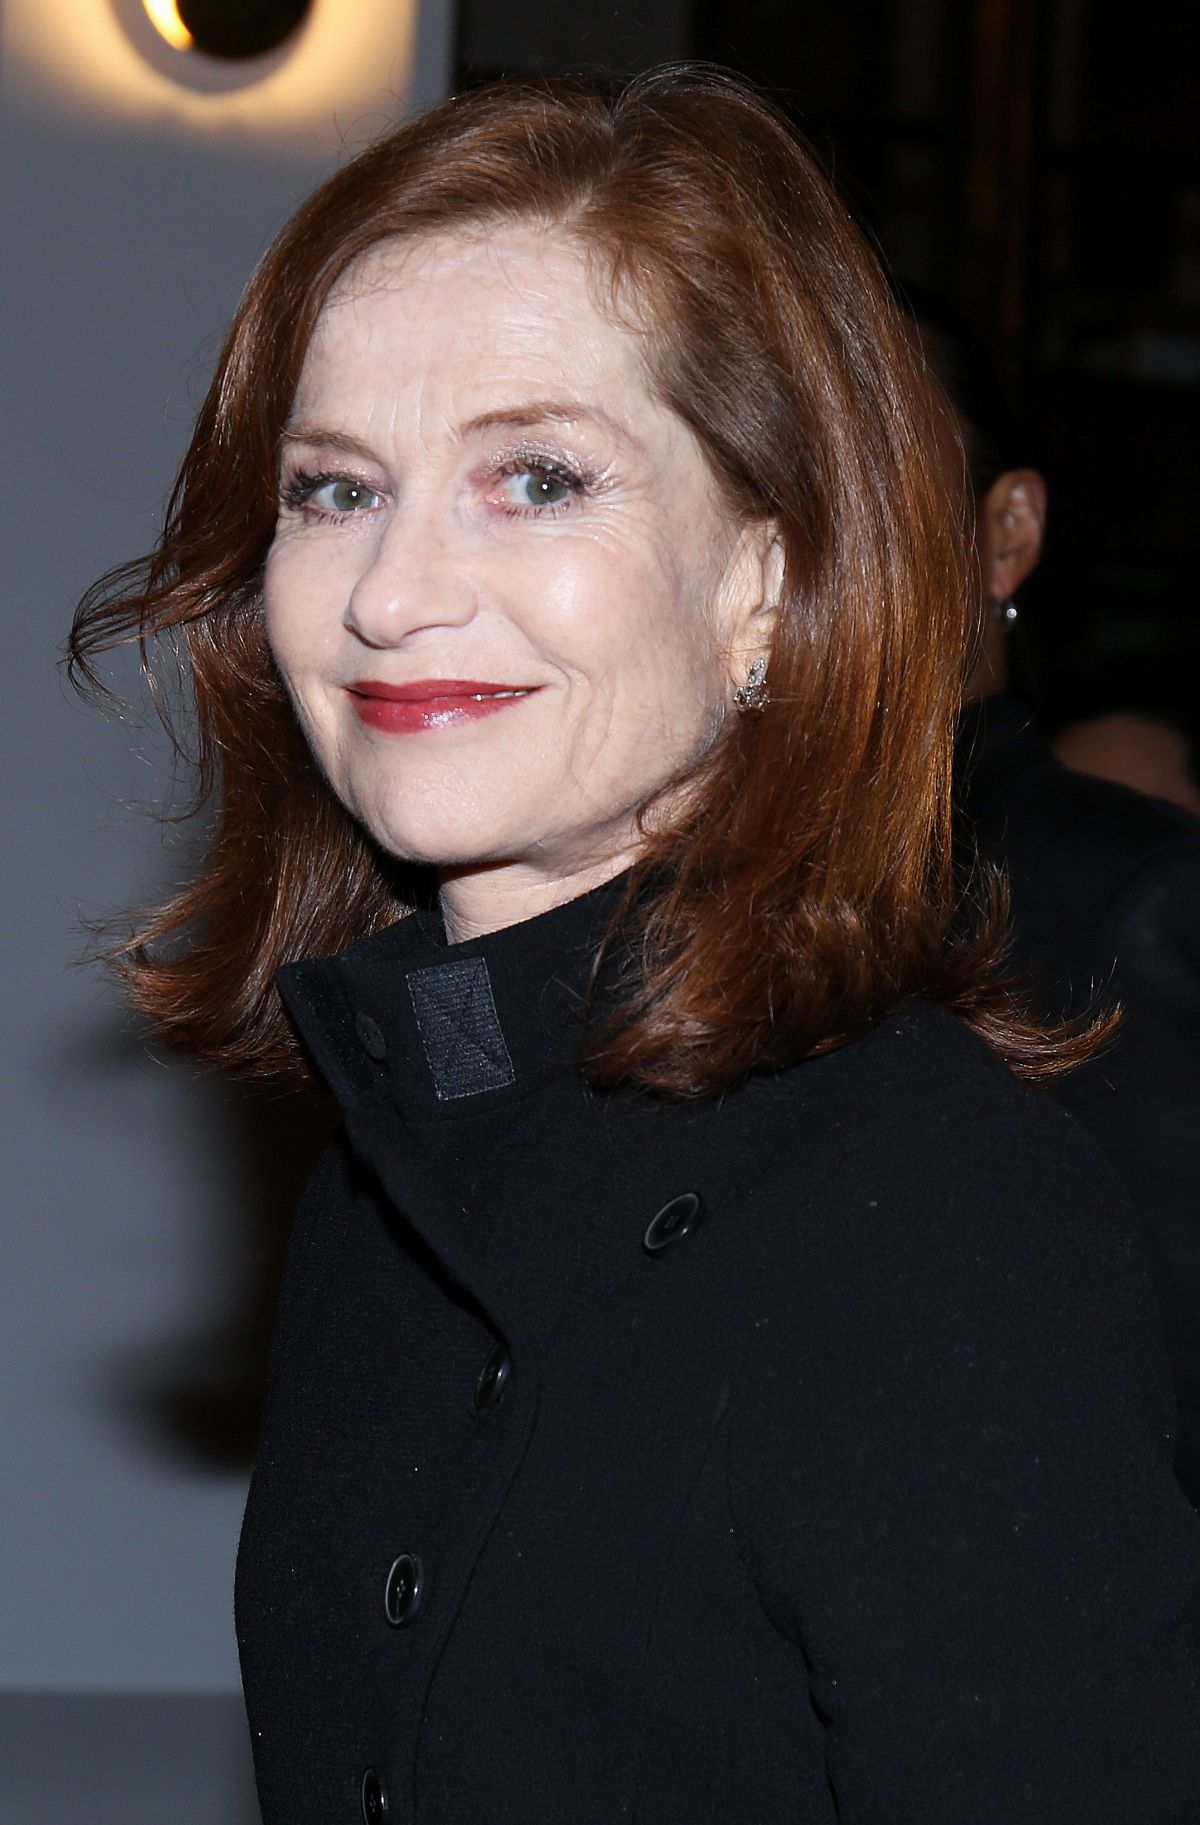 ISABELLE HUPPERT at Westminster Hotel in Paris 01/30/2017 - HawtCelebs1200 x 1825